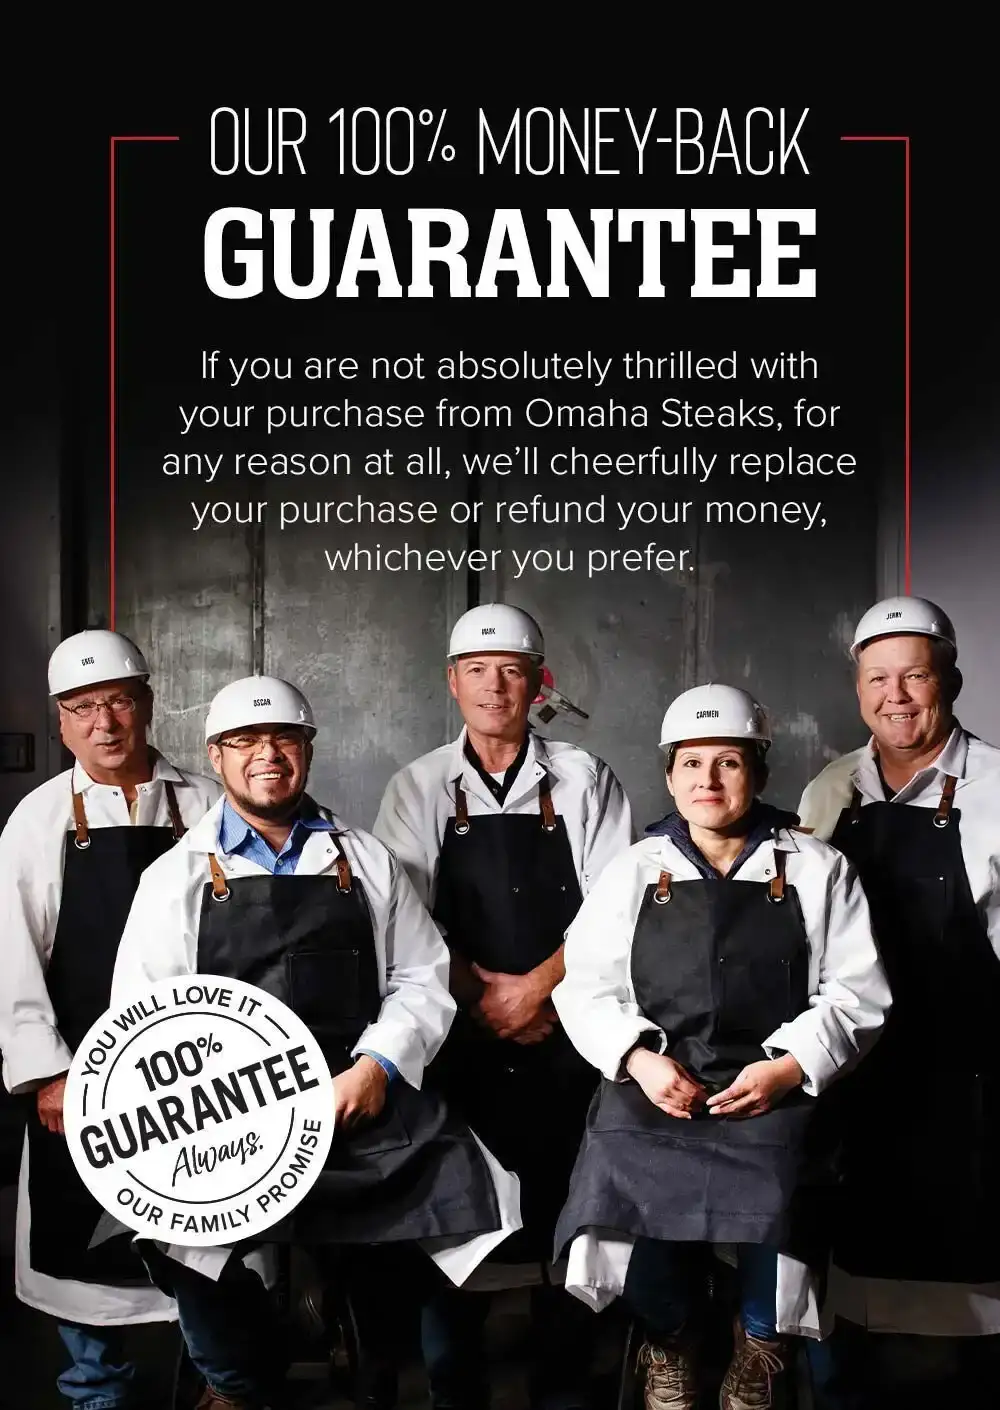 Our 100% Money-Back Guarantee | If you are not absolutely thrilled with your purchase from Omaha Steaks, for any reason at all, we'll cheerfully replace your purchase or refund your money, whichever you prefer.